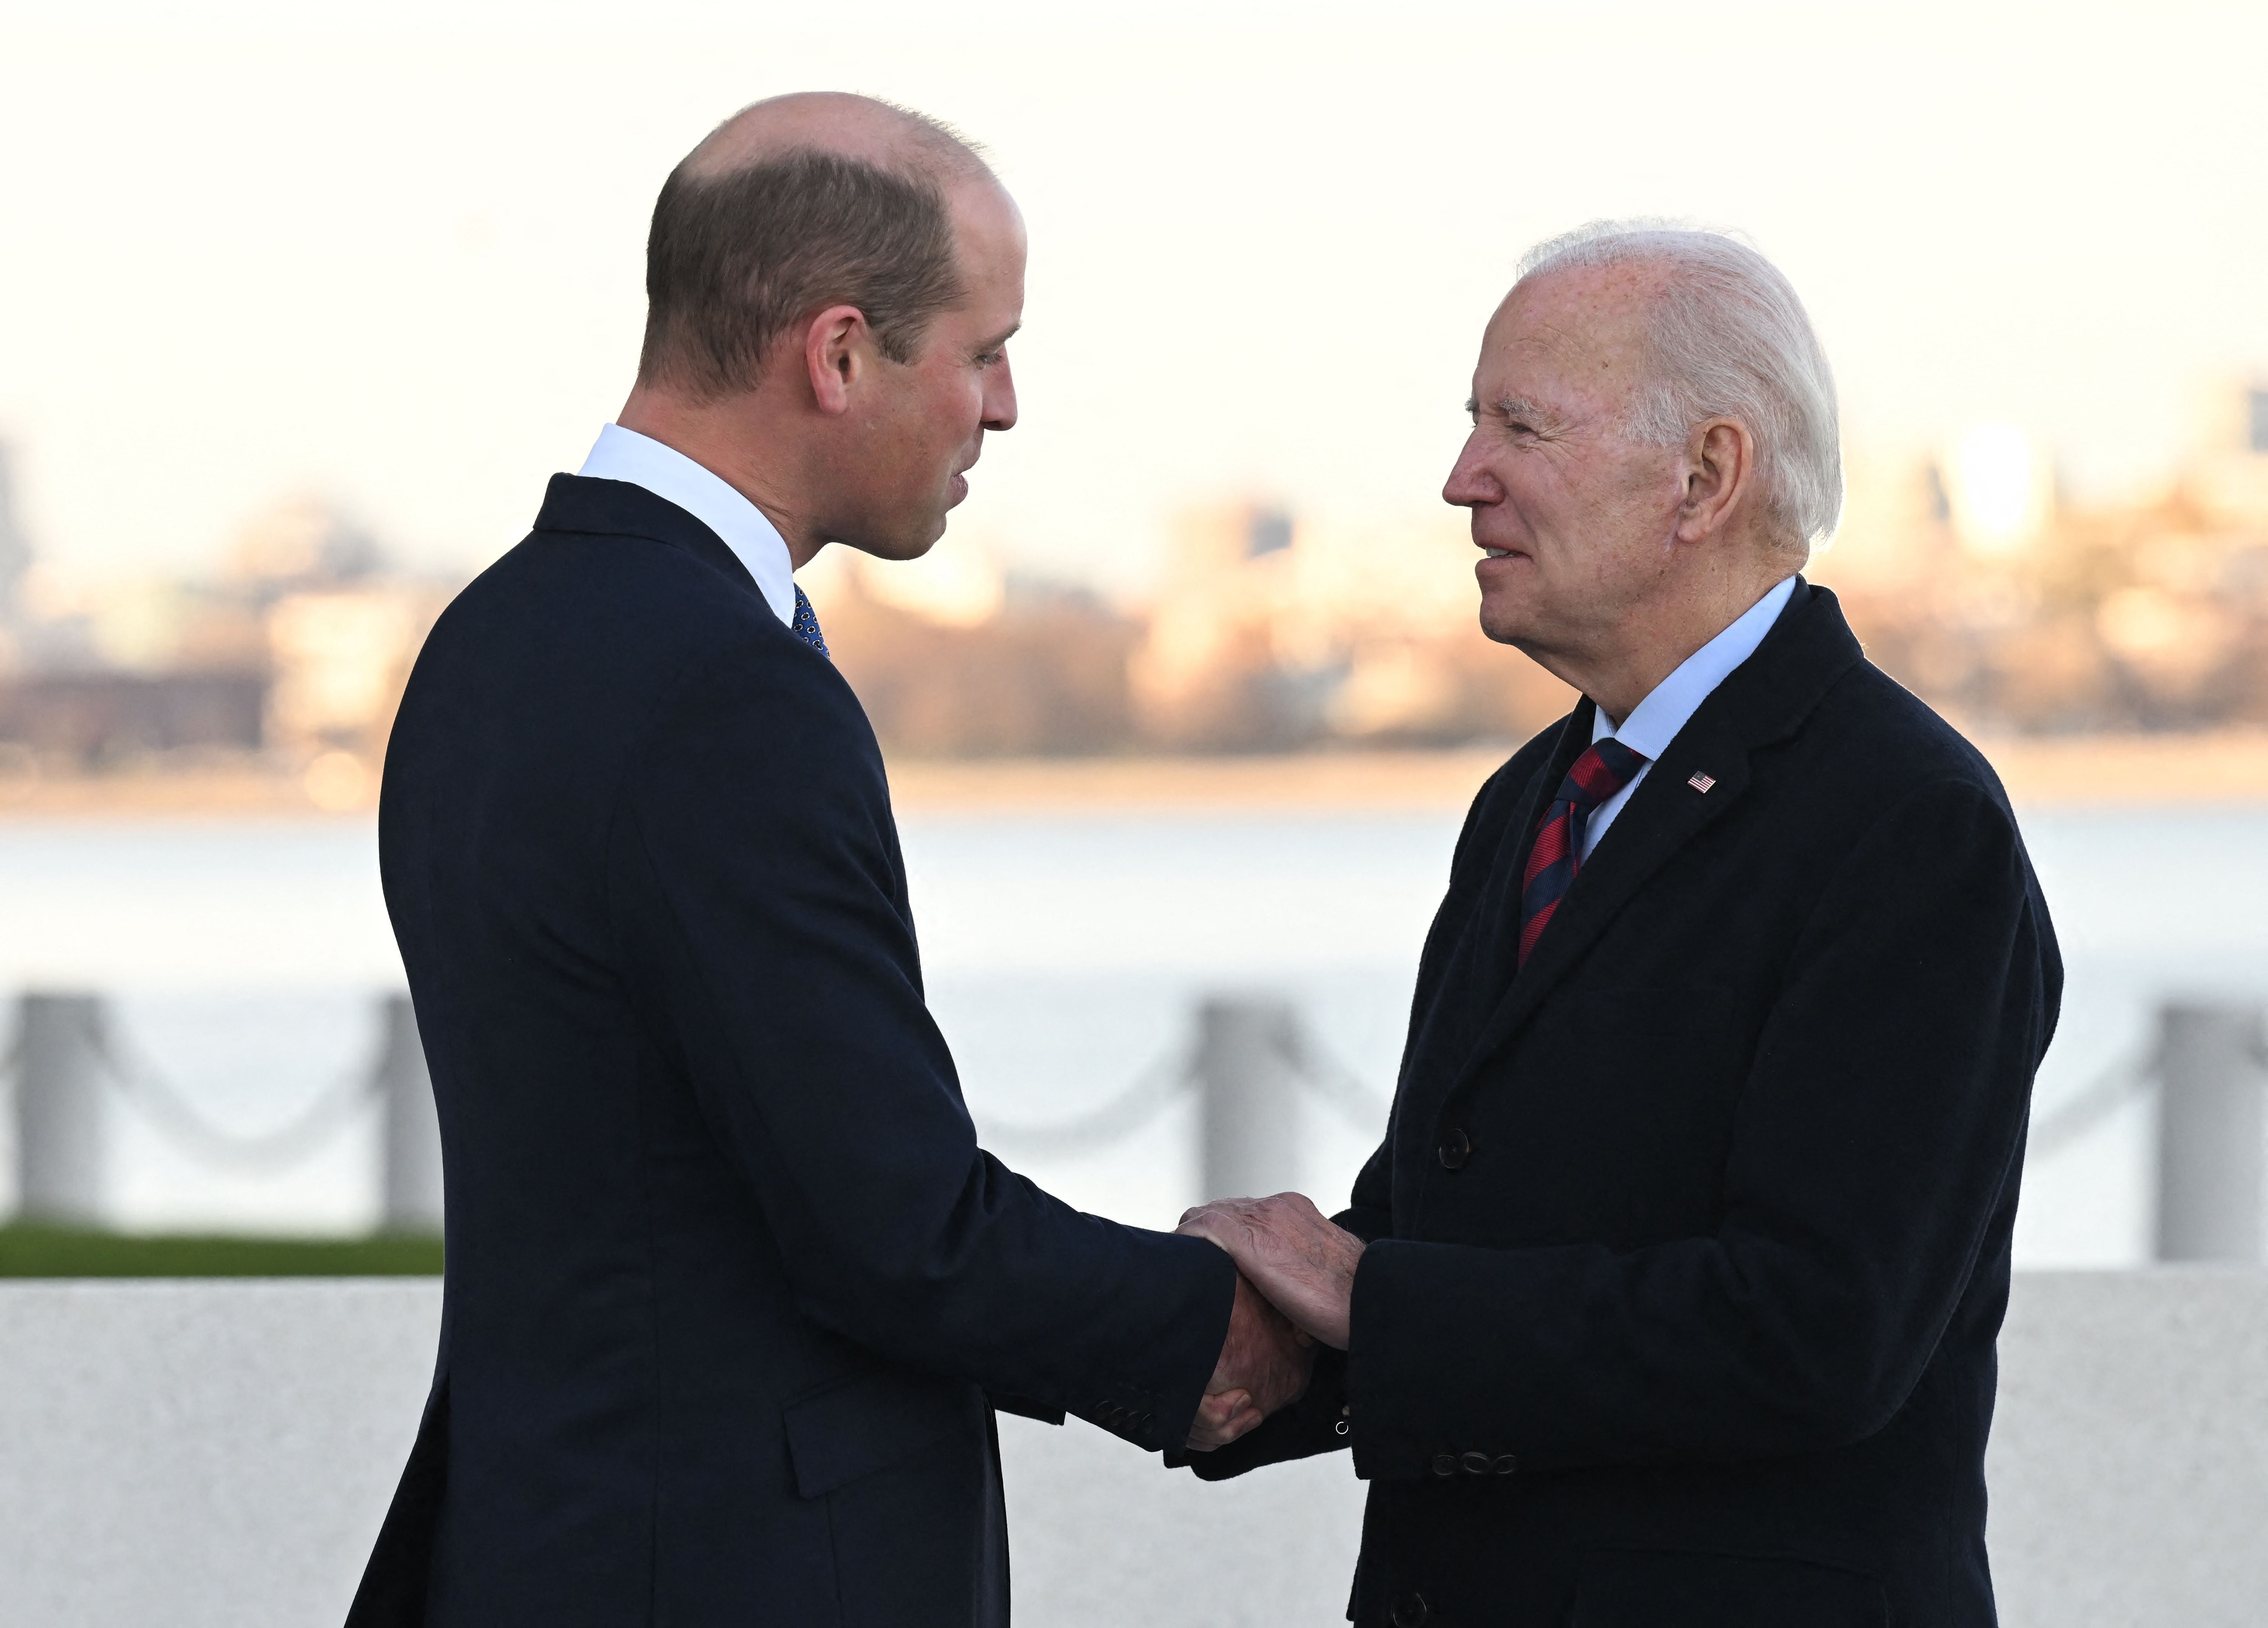 President Joe Biden meets with Prince William at the John F. Kennedy Presidential Library and Museum in Boston